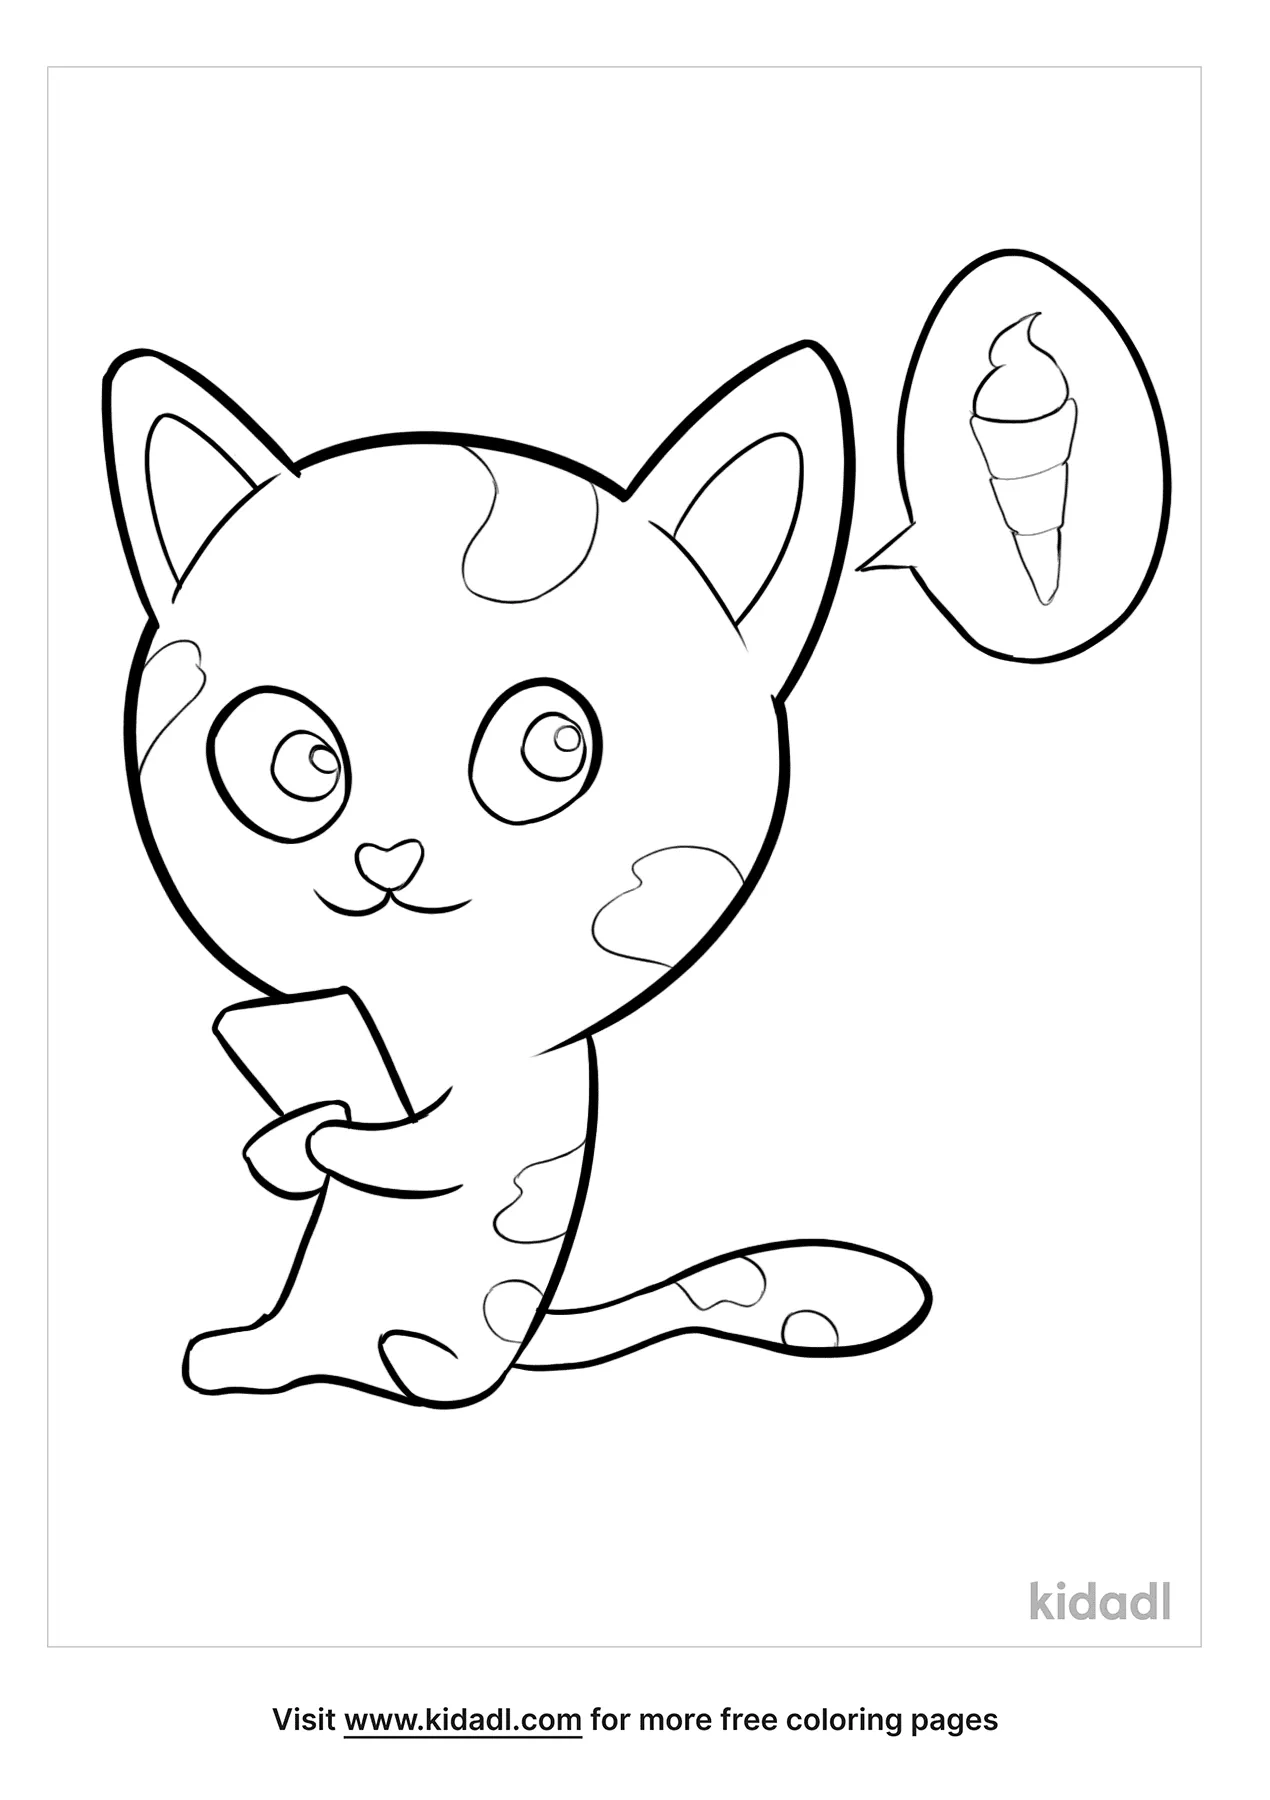 Cat Coloring Pages   Free Animals Coloring Pages   Kidadl